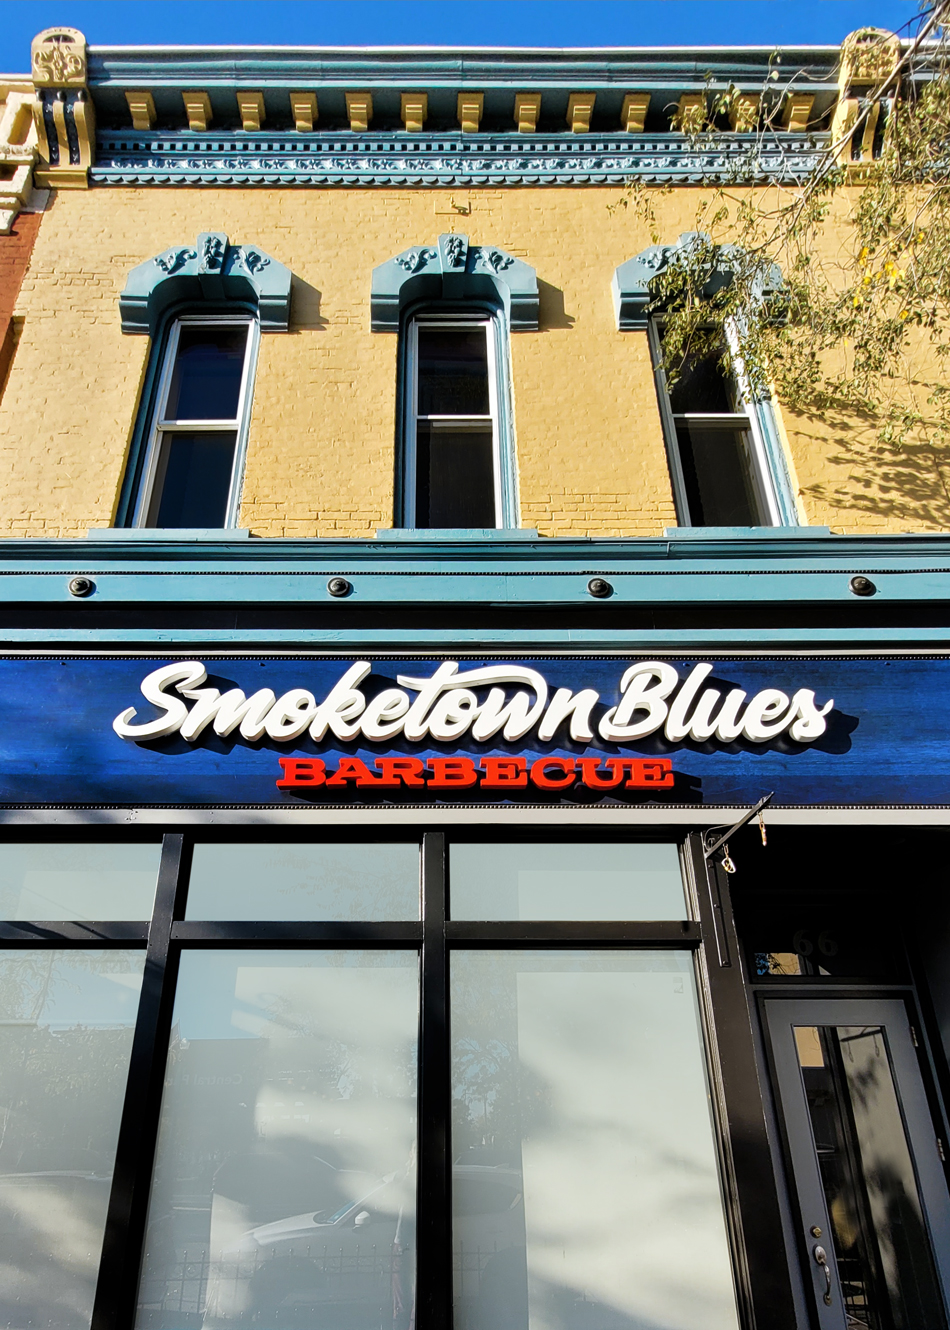 Smoketown Blues BBQ building sign logo looking up